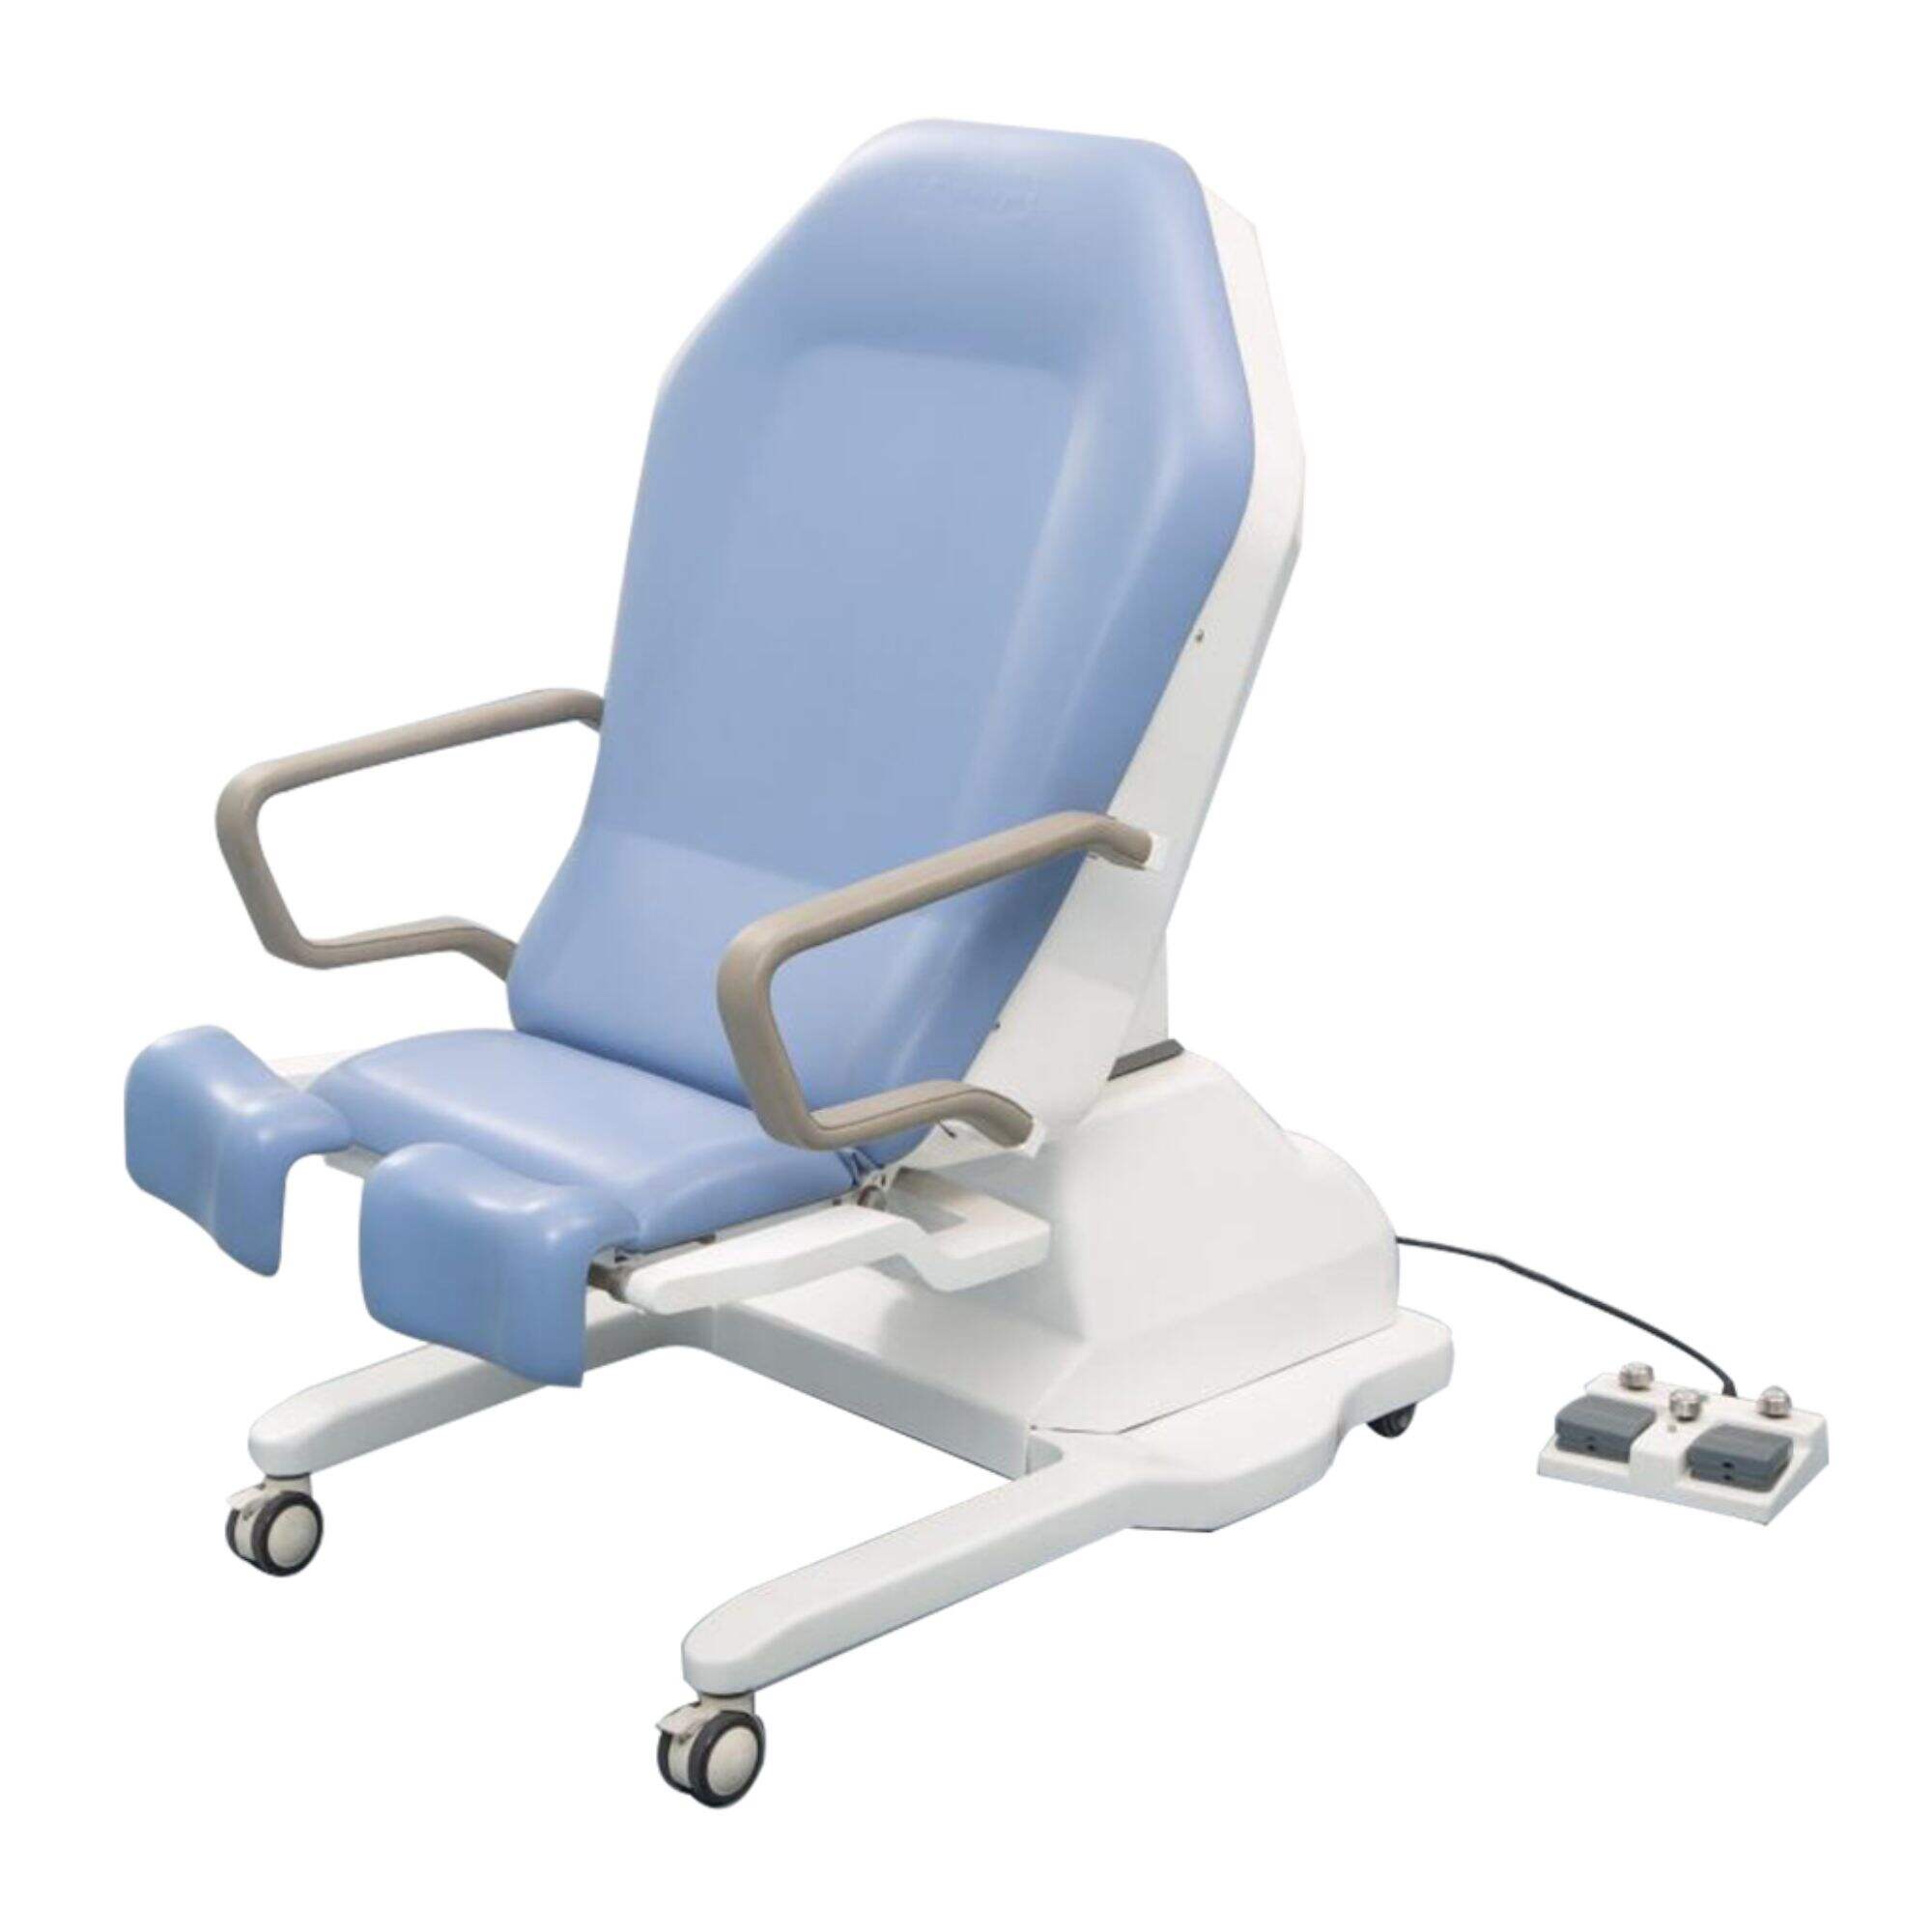 YFDC-LT-E5 Multi-Functional Electric Obstetric Table